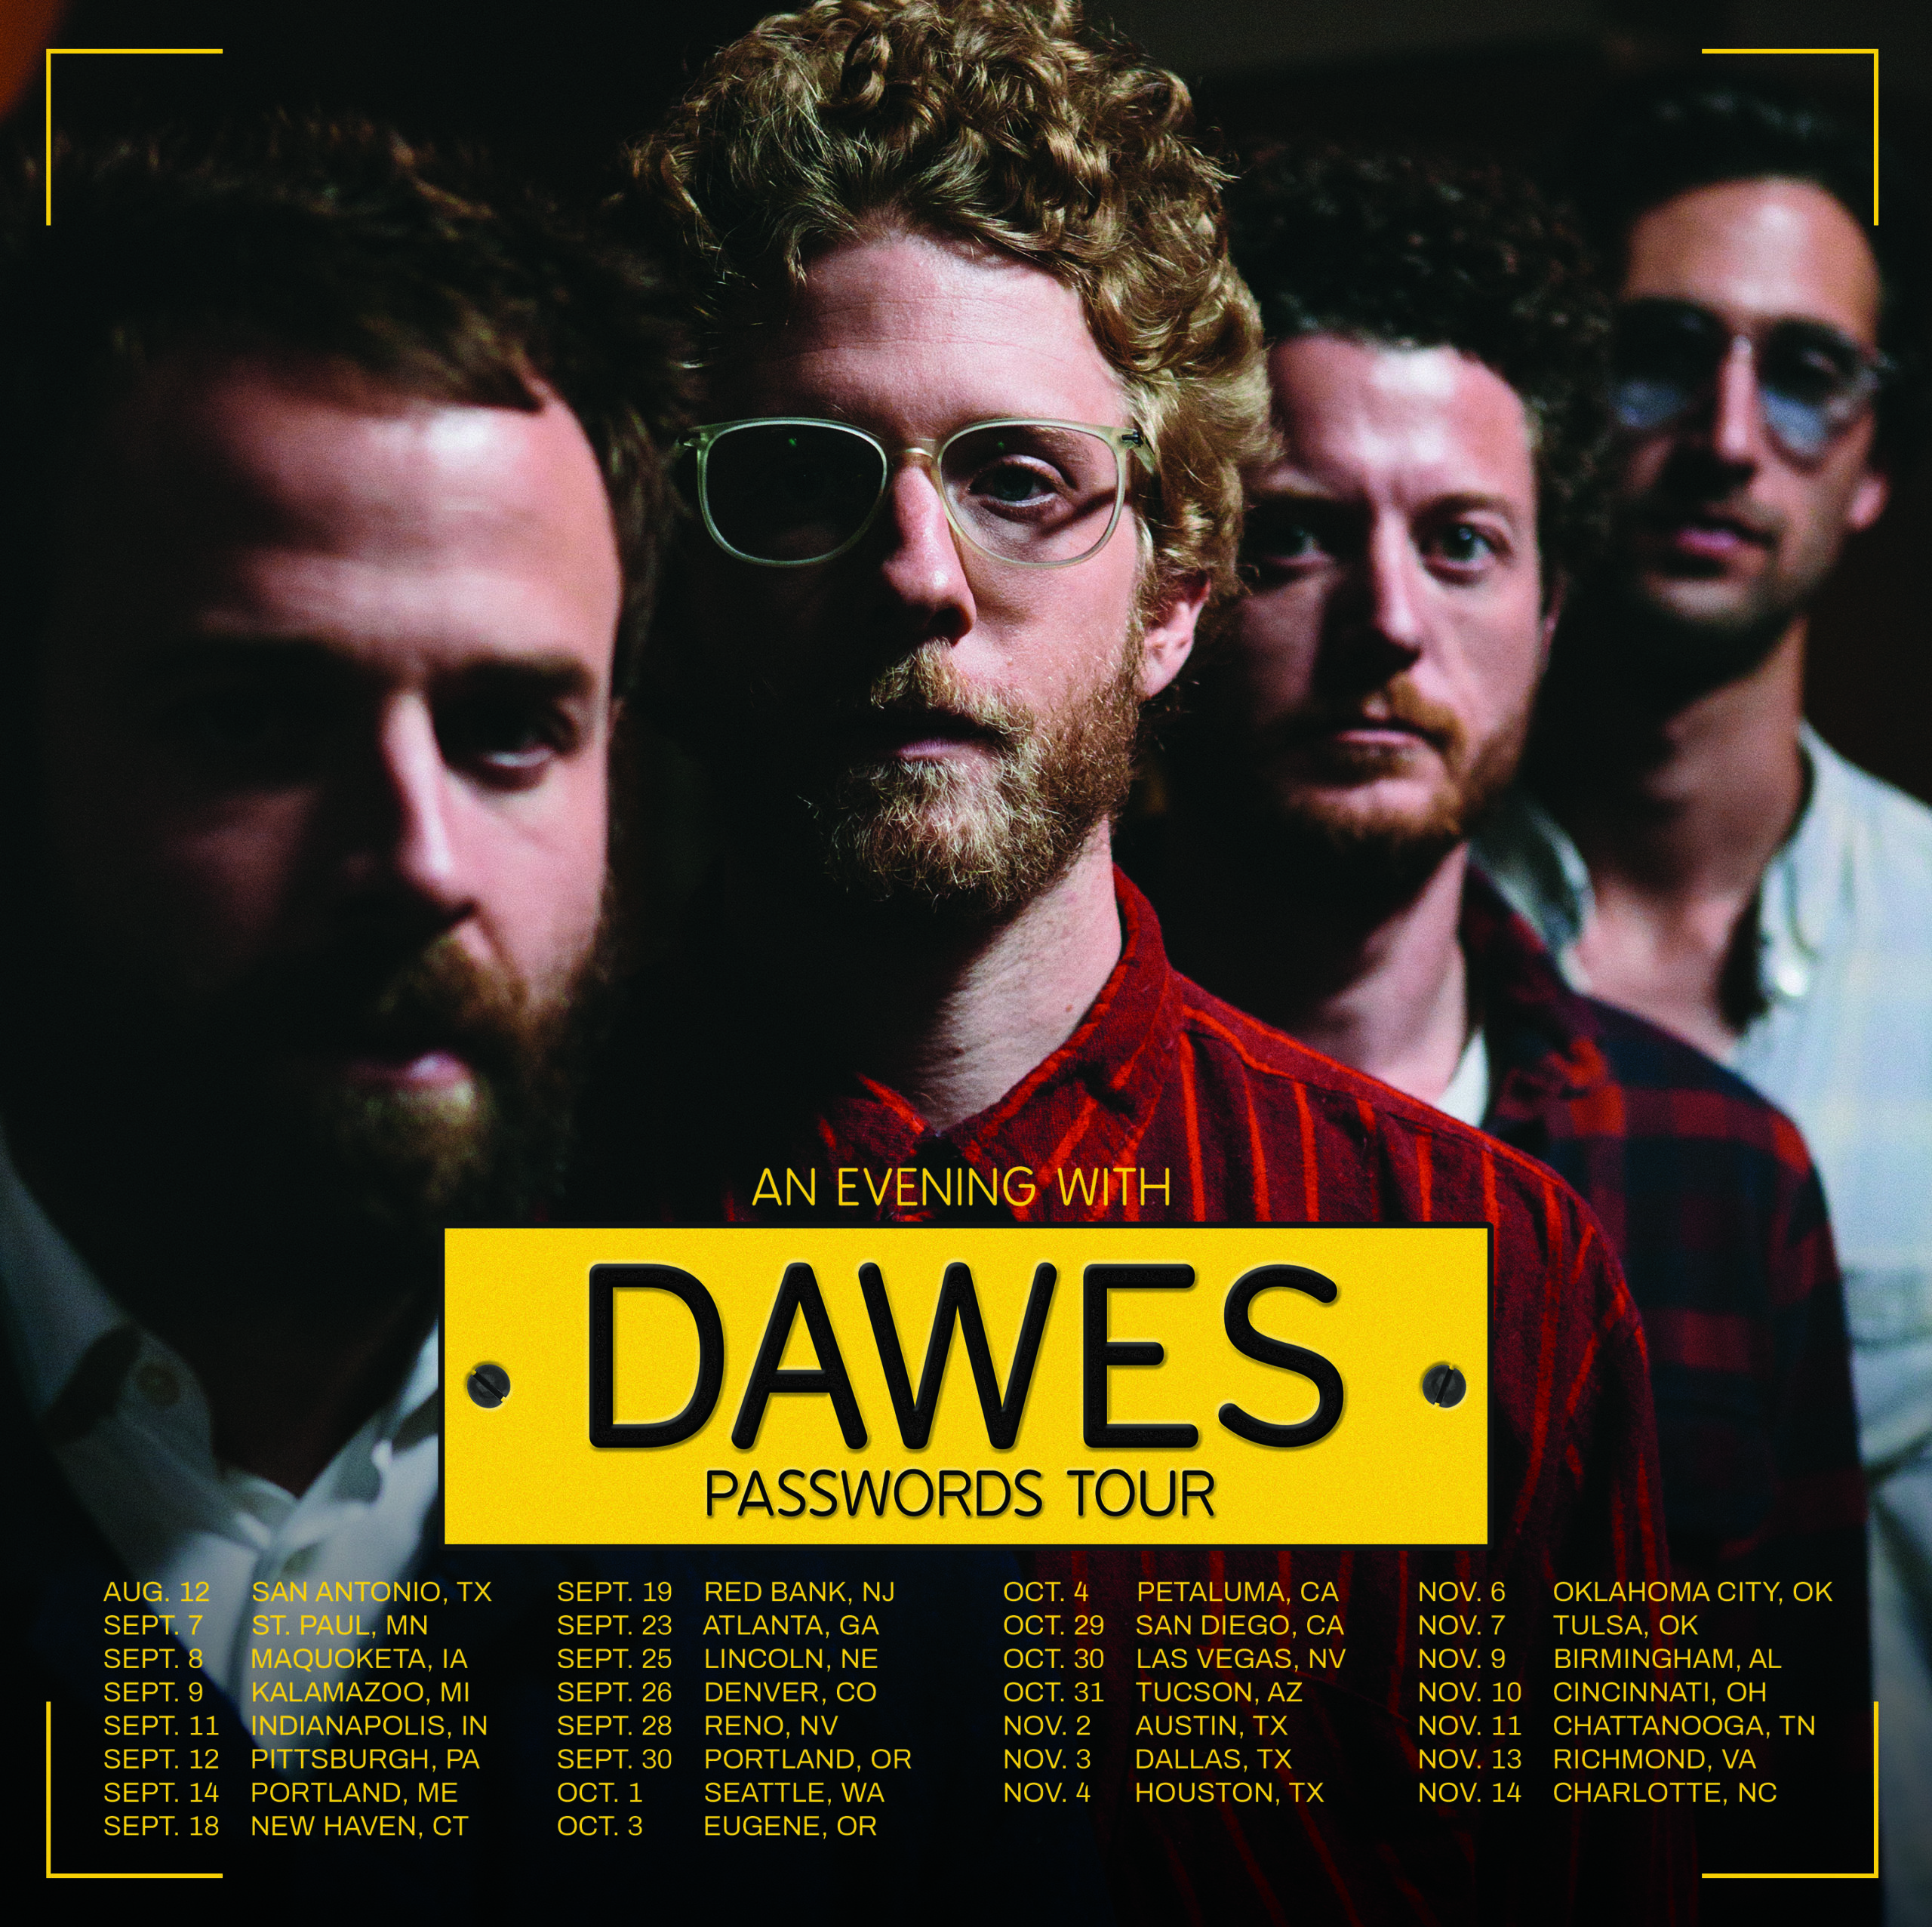 An Evening With Dawes: Passwords Tour Announced